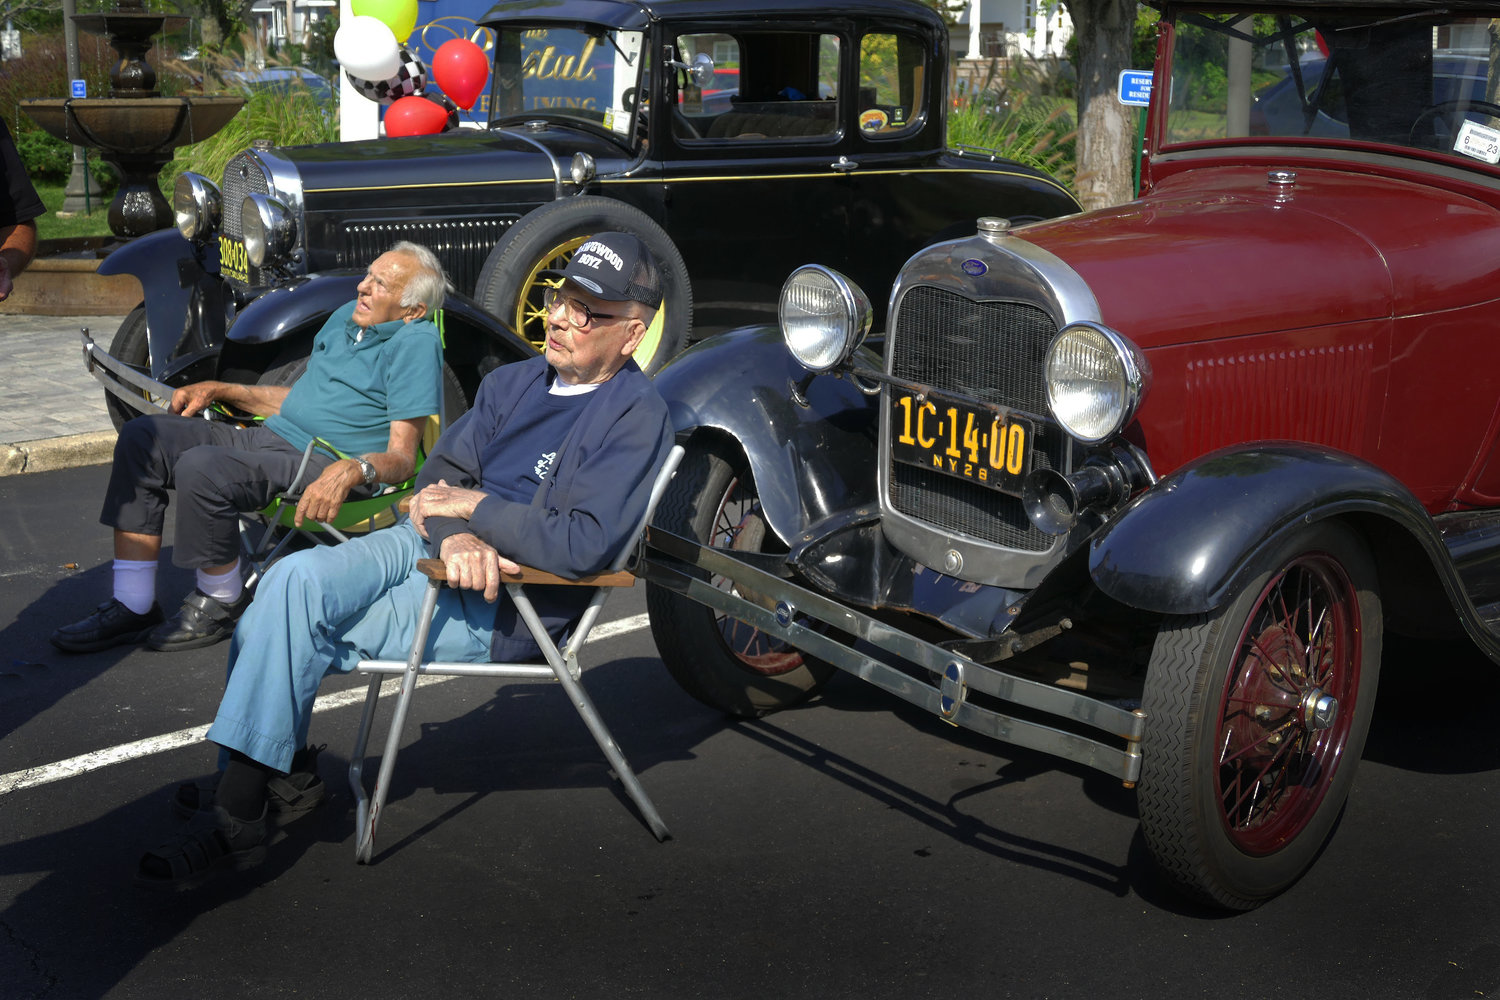 Bob Gunther and Dick Creeron, owners of Ford Model T’s, showcased their rides at The Bristal Assisted Living facility at North Woodmere for the viewing pleasure of residents.